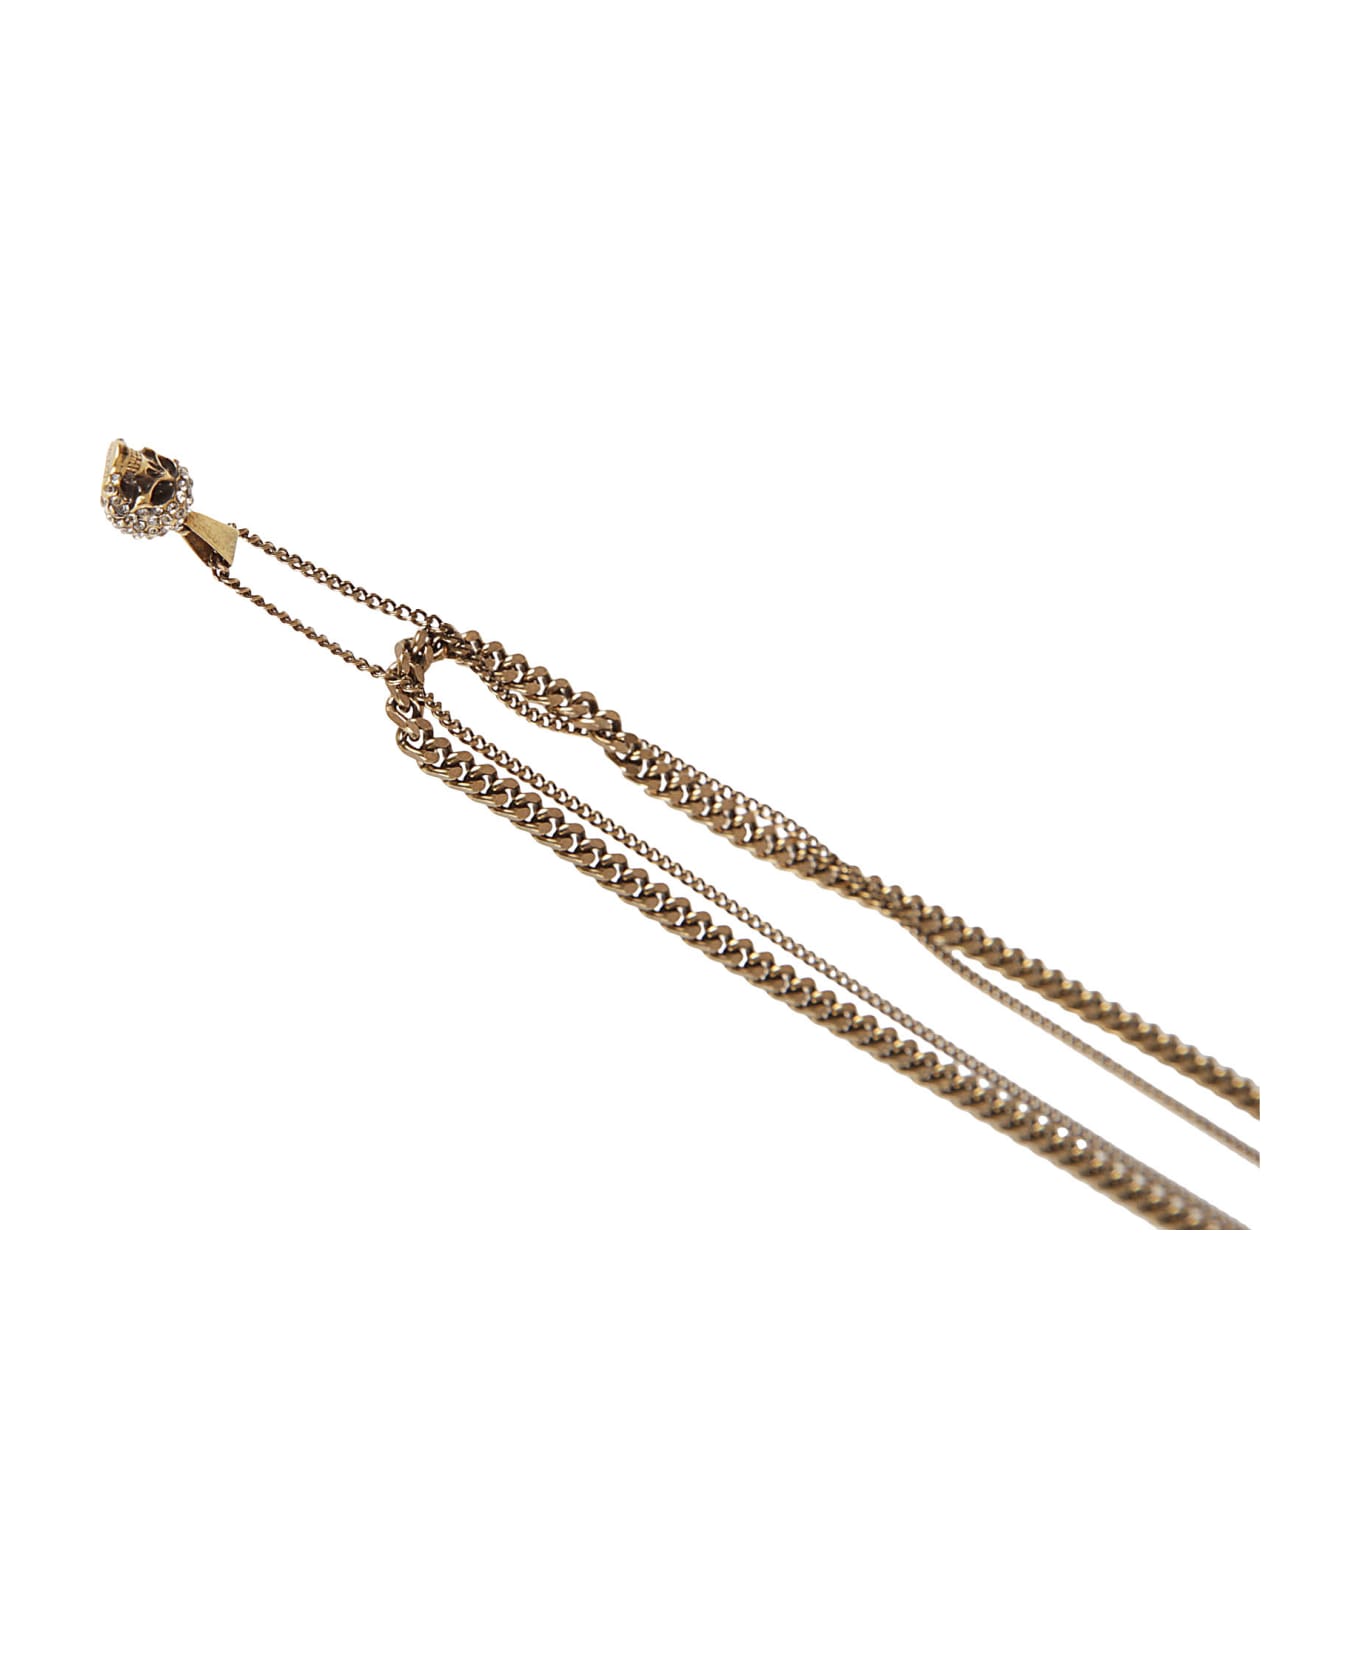 Alexander McQueen Pave Double Chain Necklace - Greige